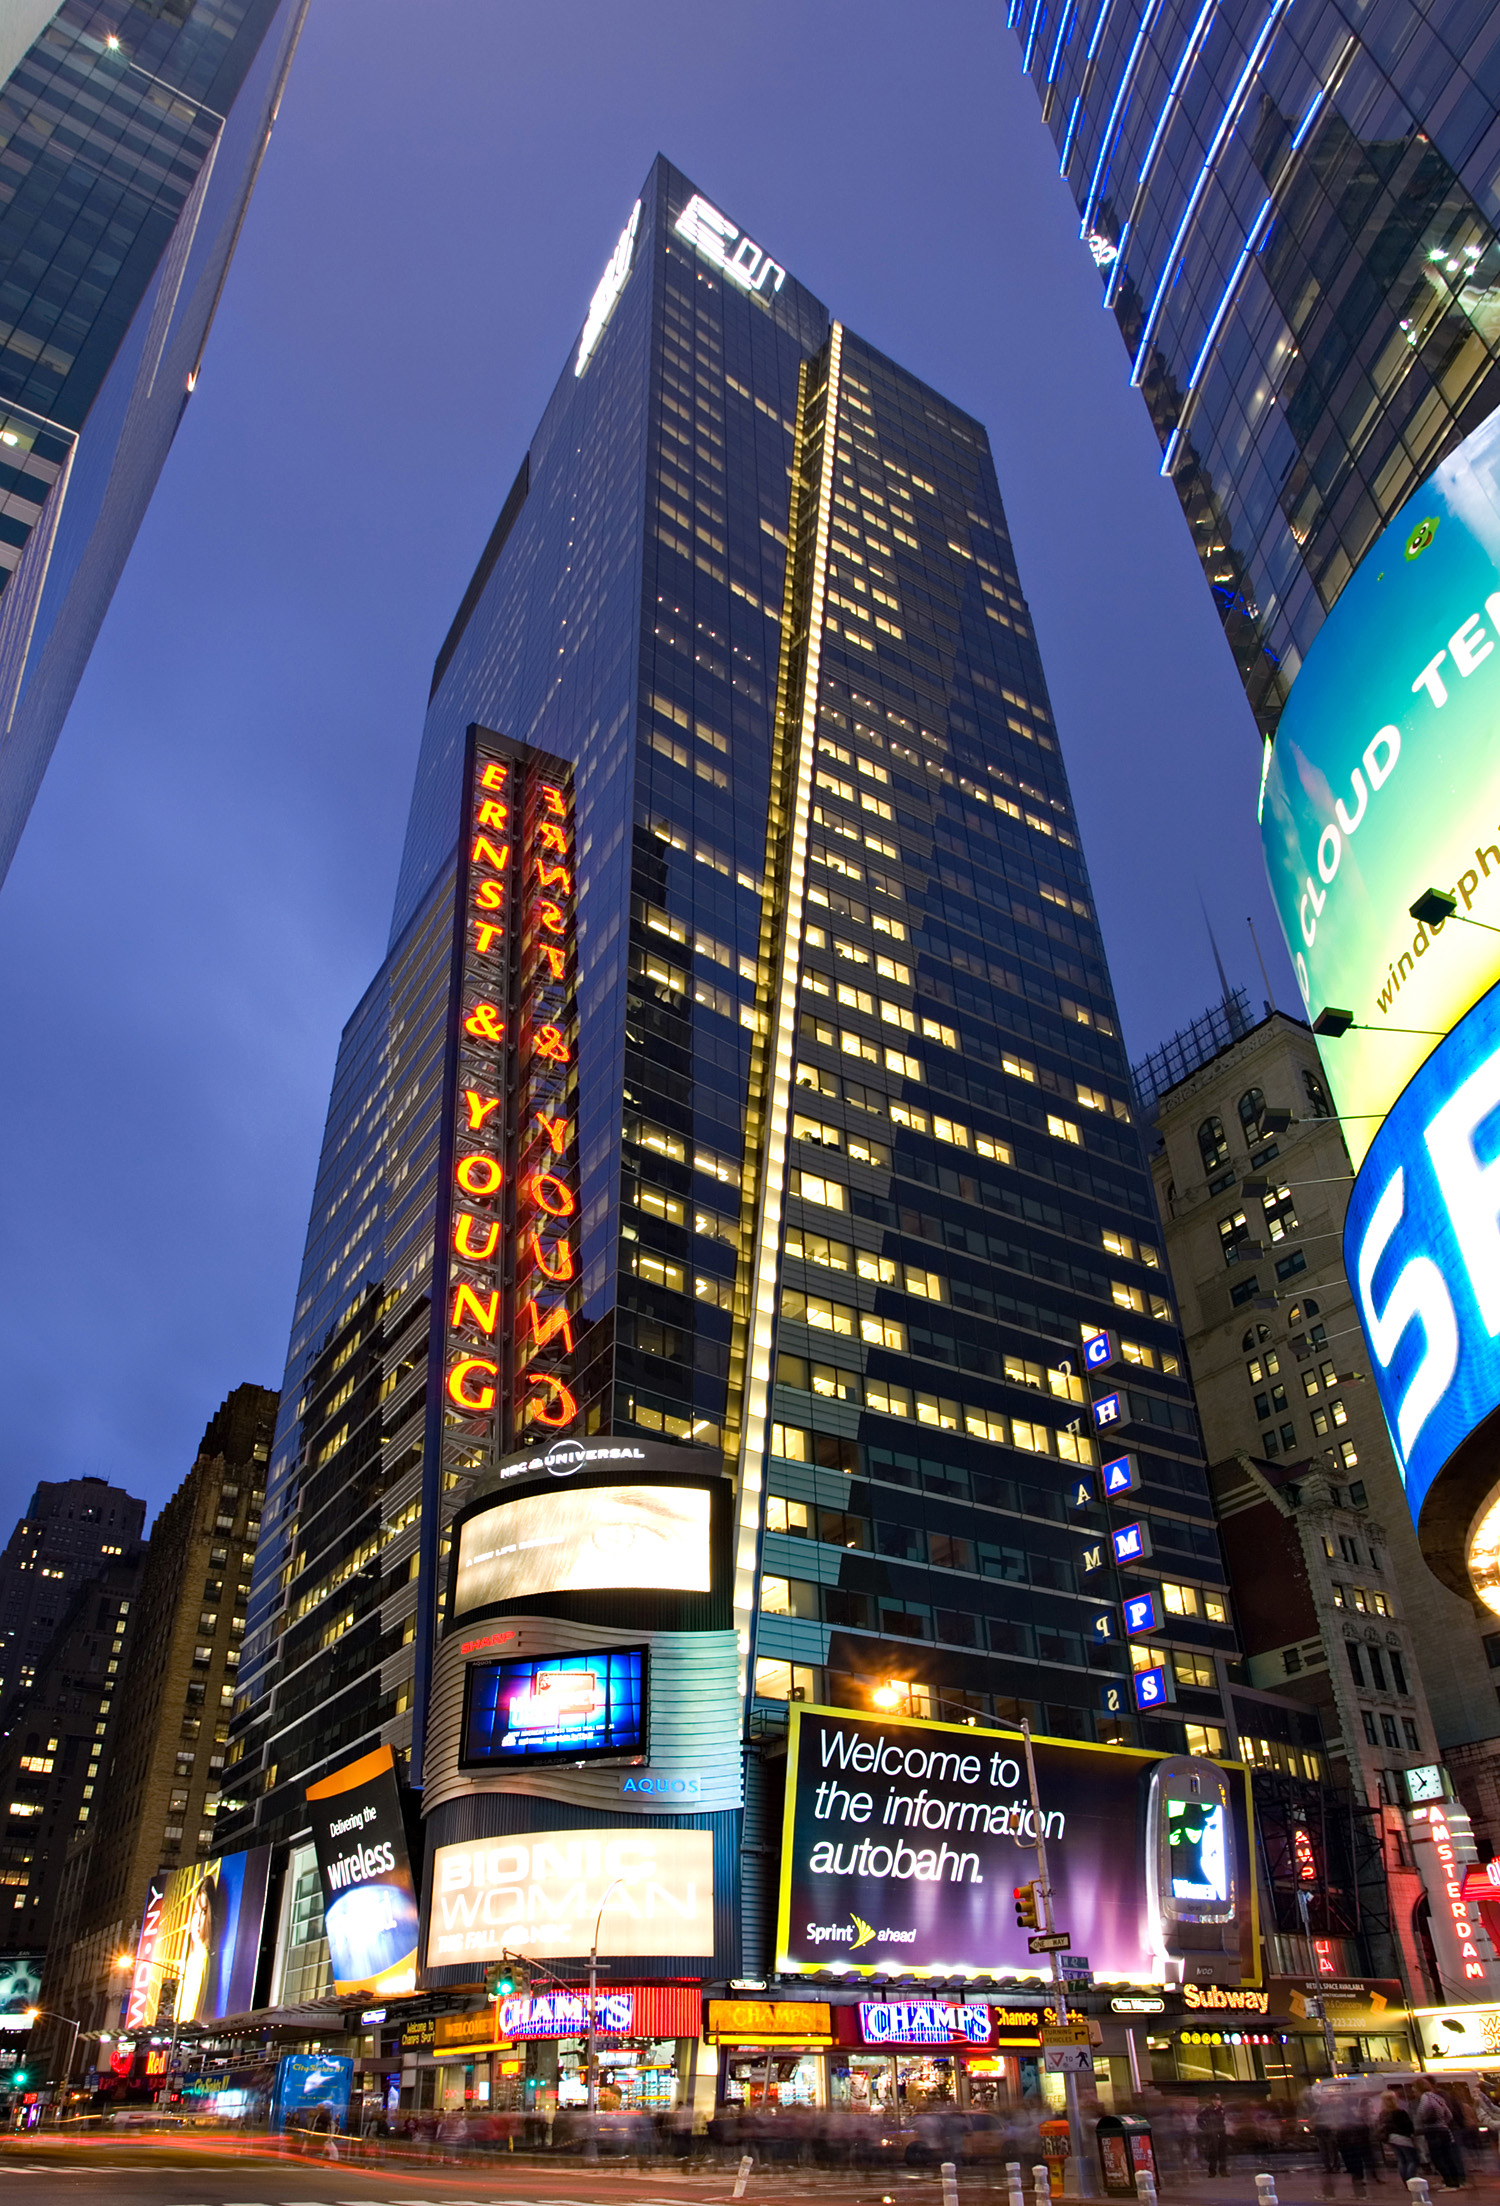 Ernst & Young Tower - Illegal shot with tripod on Times Square :-) 